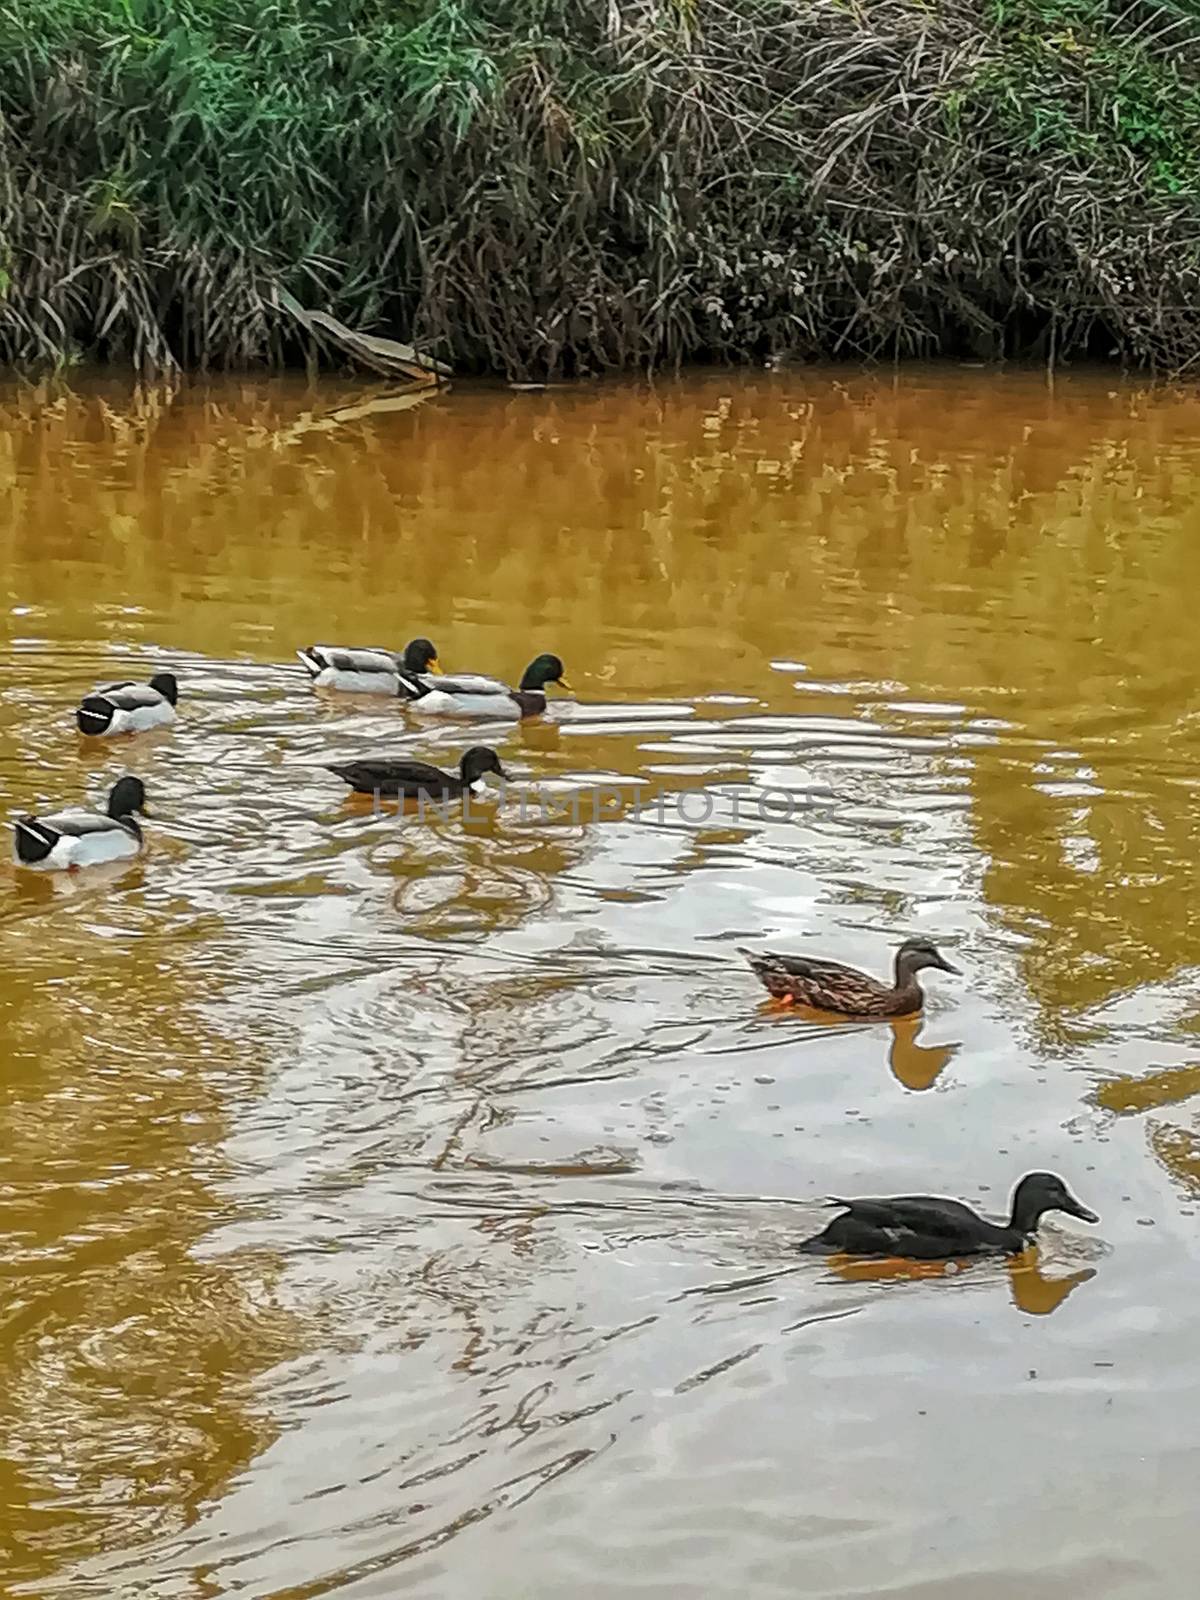 Ducks swimming in the river of the natural setting of Clot with sediment laden water after heavy rains